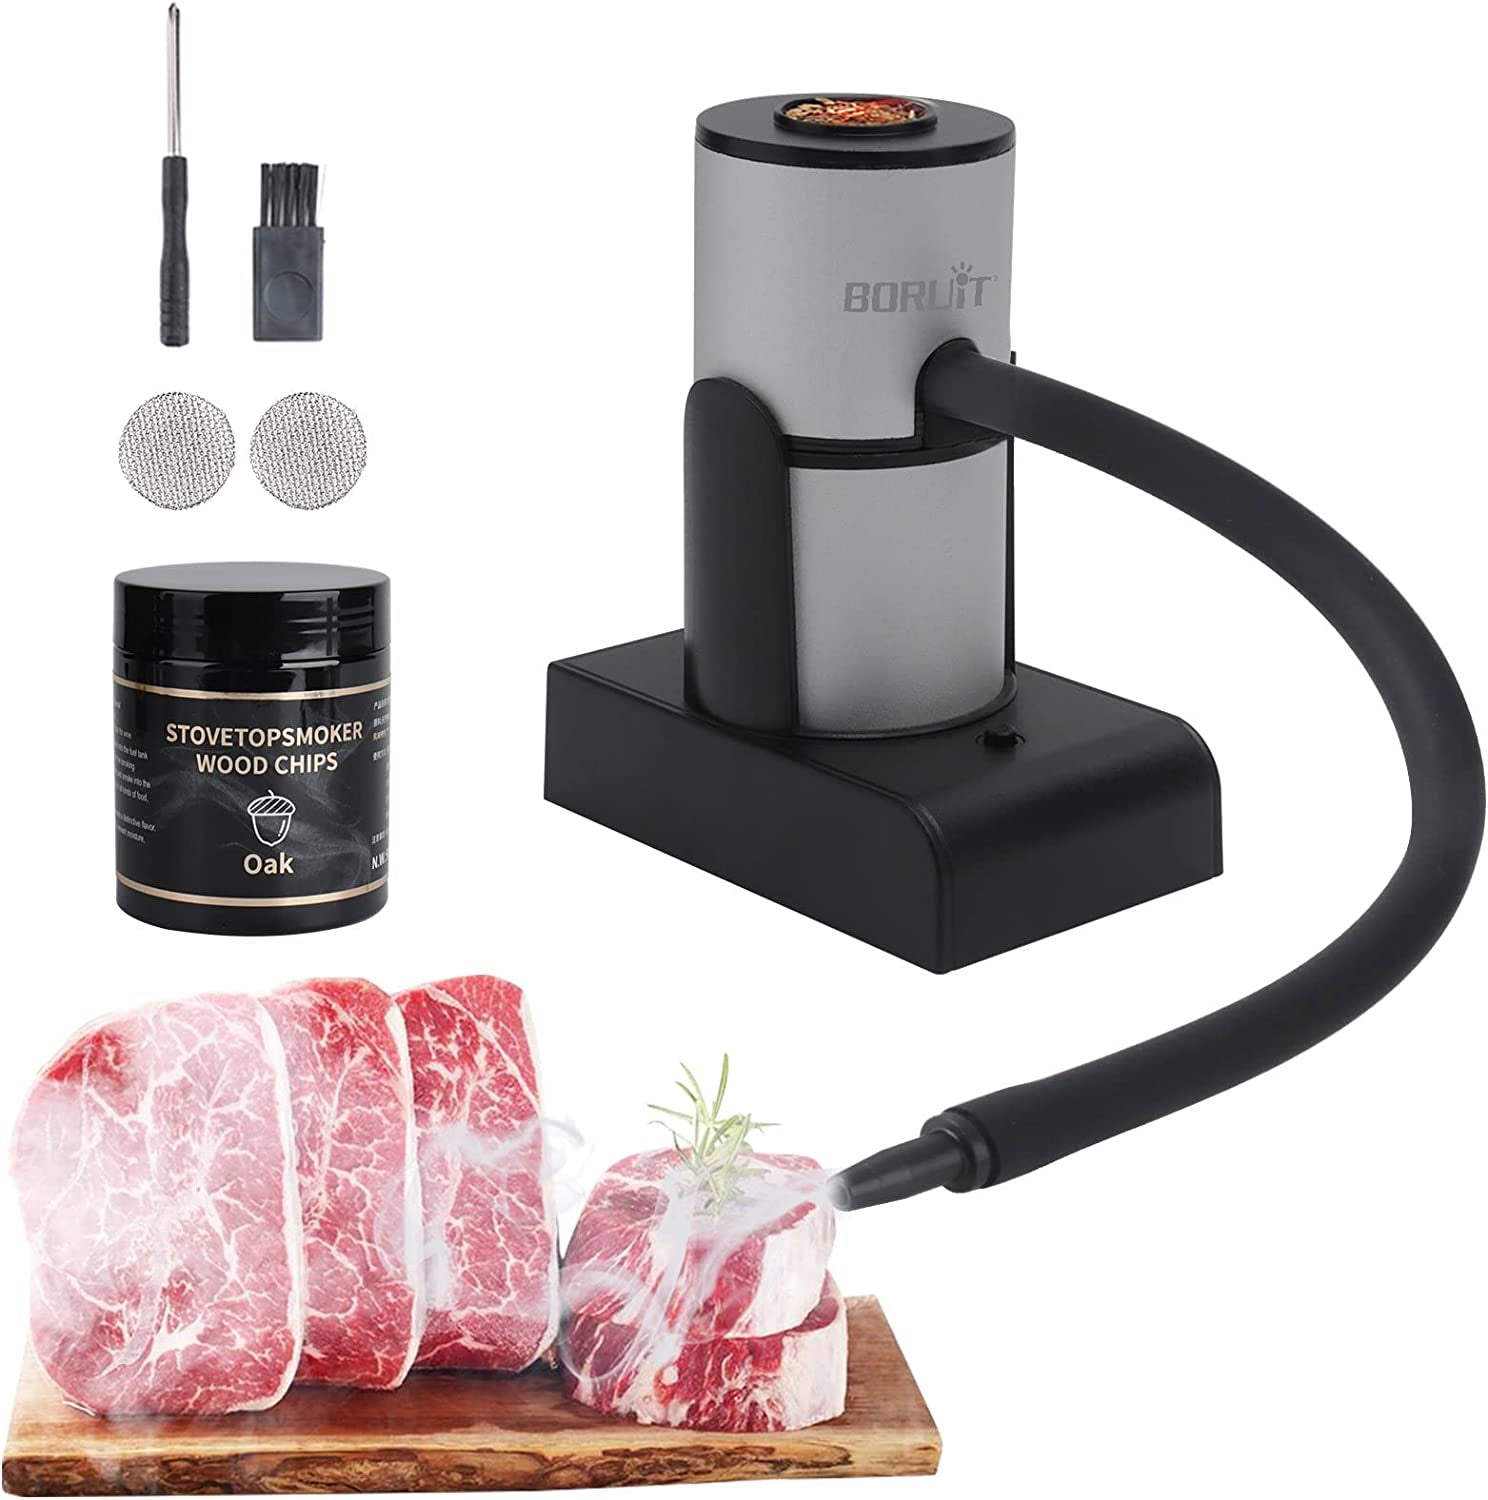 BORUIT, Smoking Gun Food Smoker Portable Wood Cocktails Smoke Infuser with 90G Oak Wood Chip,Handheld Food Kitchen Smoker for Sous Vide Meat Salmon Cocktails Drink Cheese BBQ Grill,Perfect for Foodie Gifts（Silver)